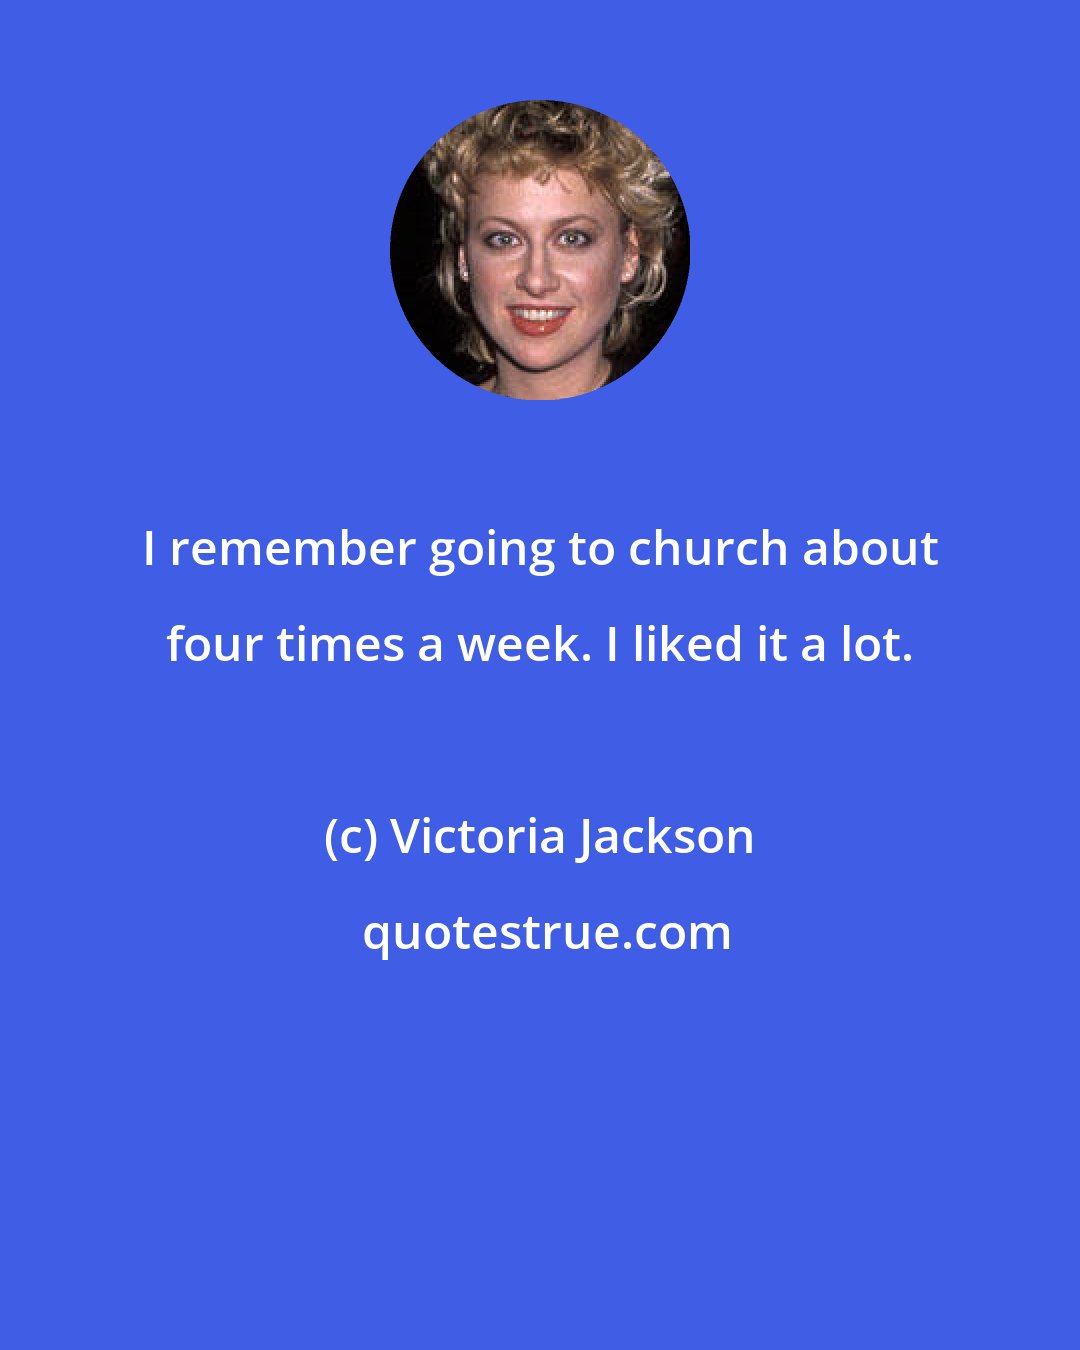 Victoria Jackson: I remember going to church about four times a week. I liked it a lot.